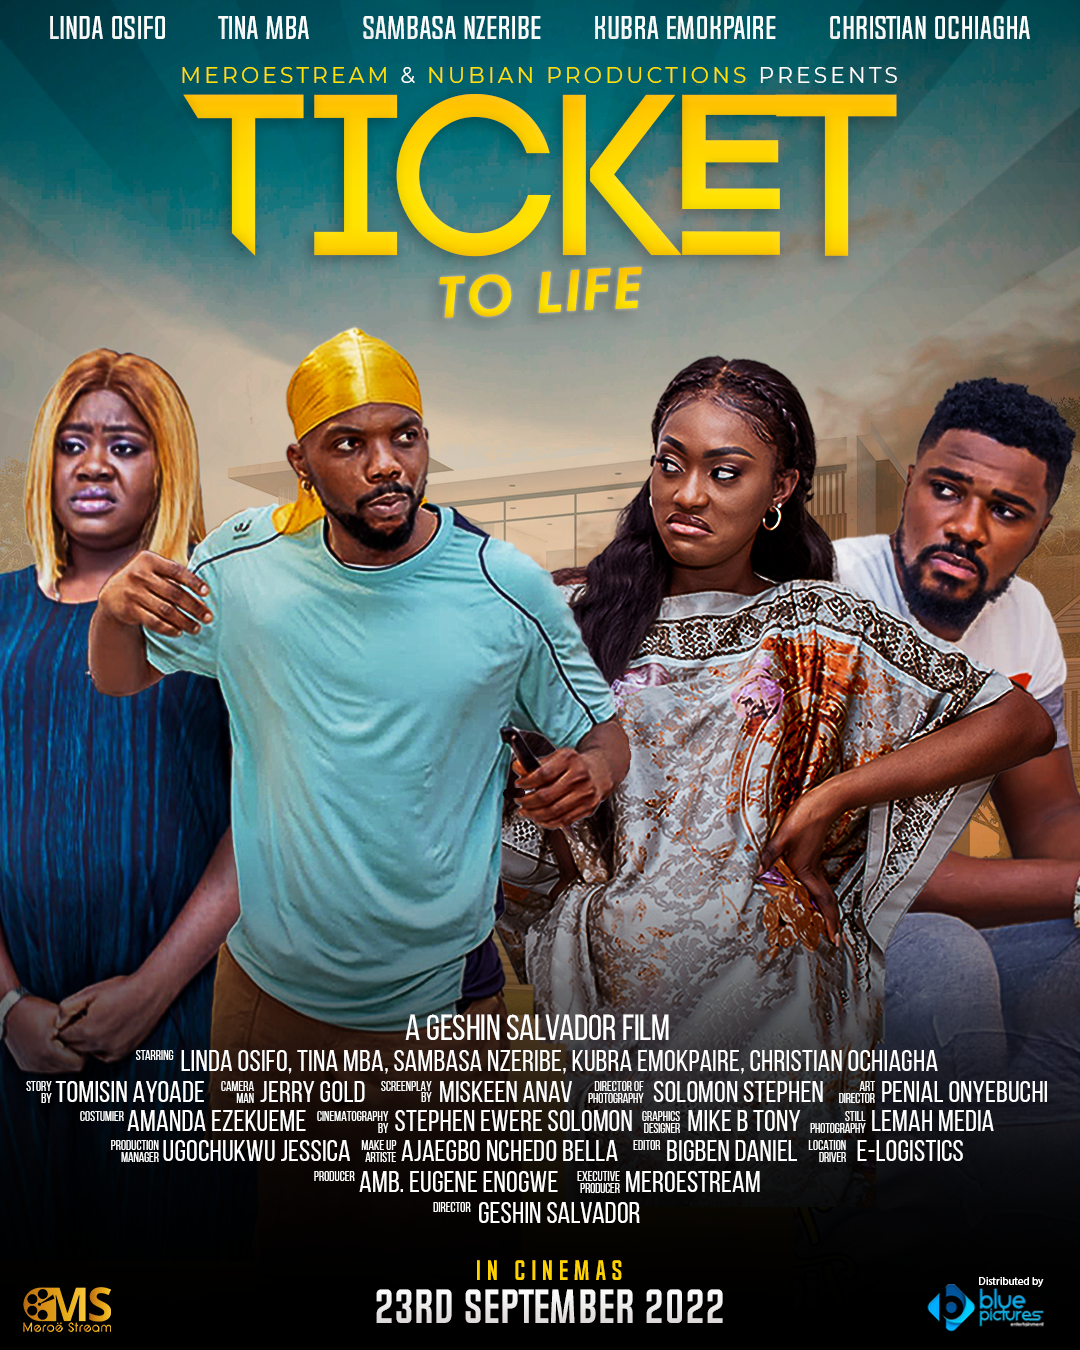 Ticket To Life More Poster5 - Everything You Need To Know About “Ticket To Life”